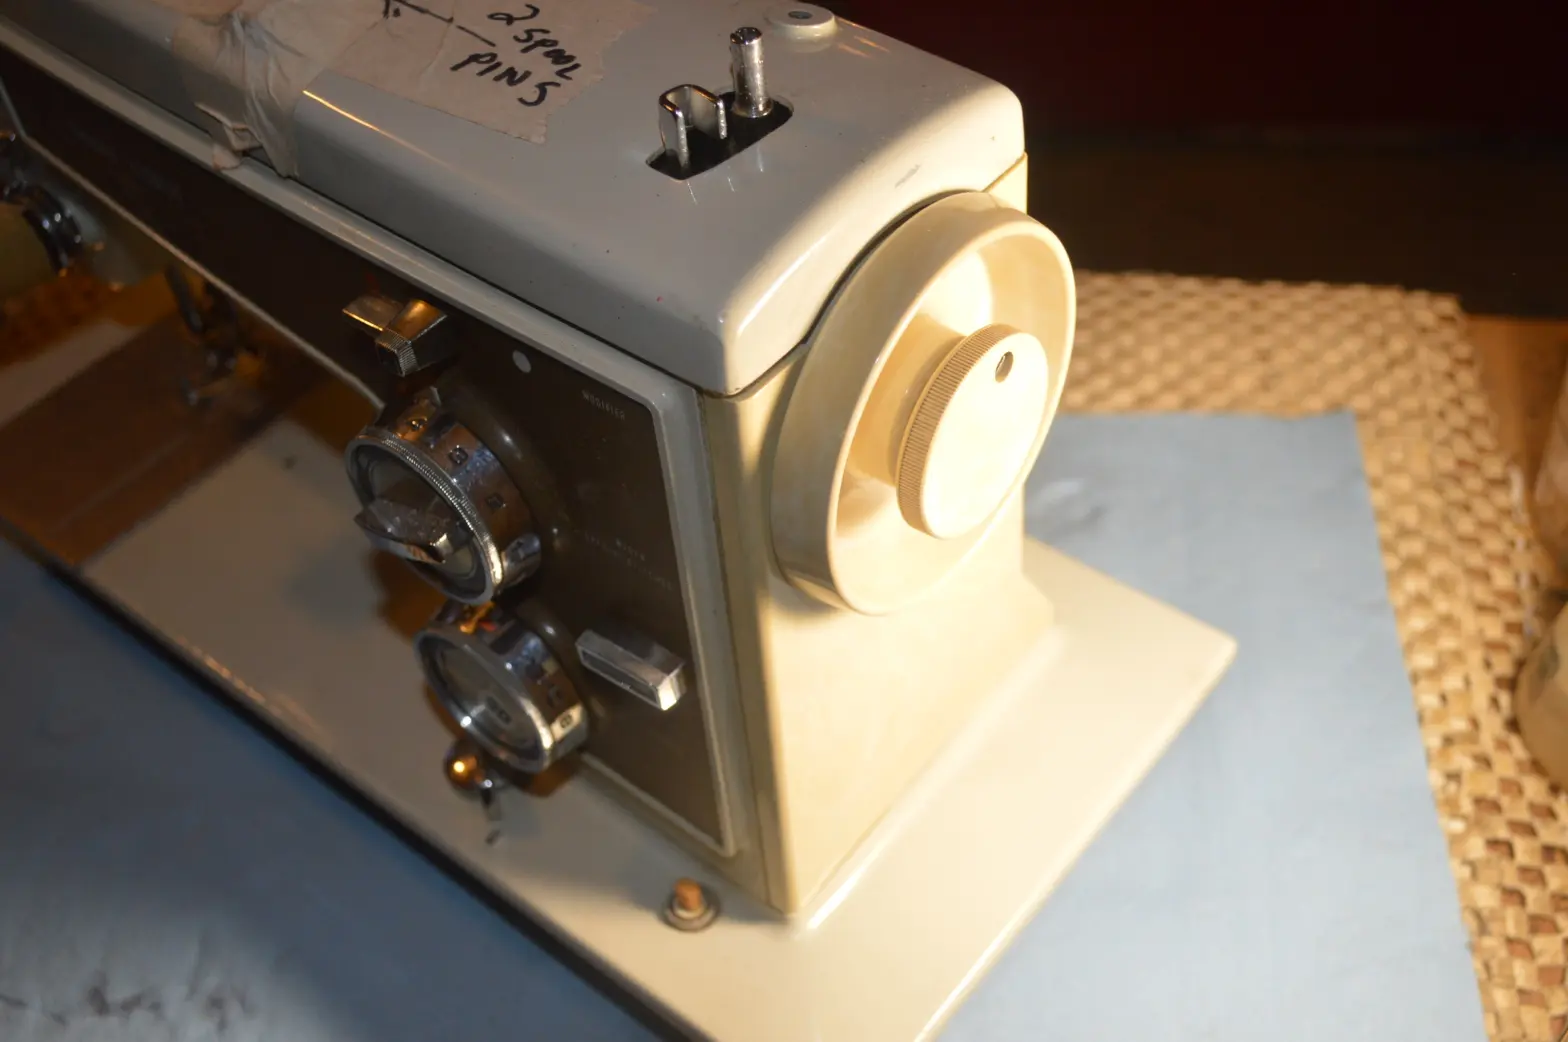 A Tutorial – Replacing the Motor Belt on a Kenmore Model 158